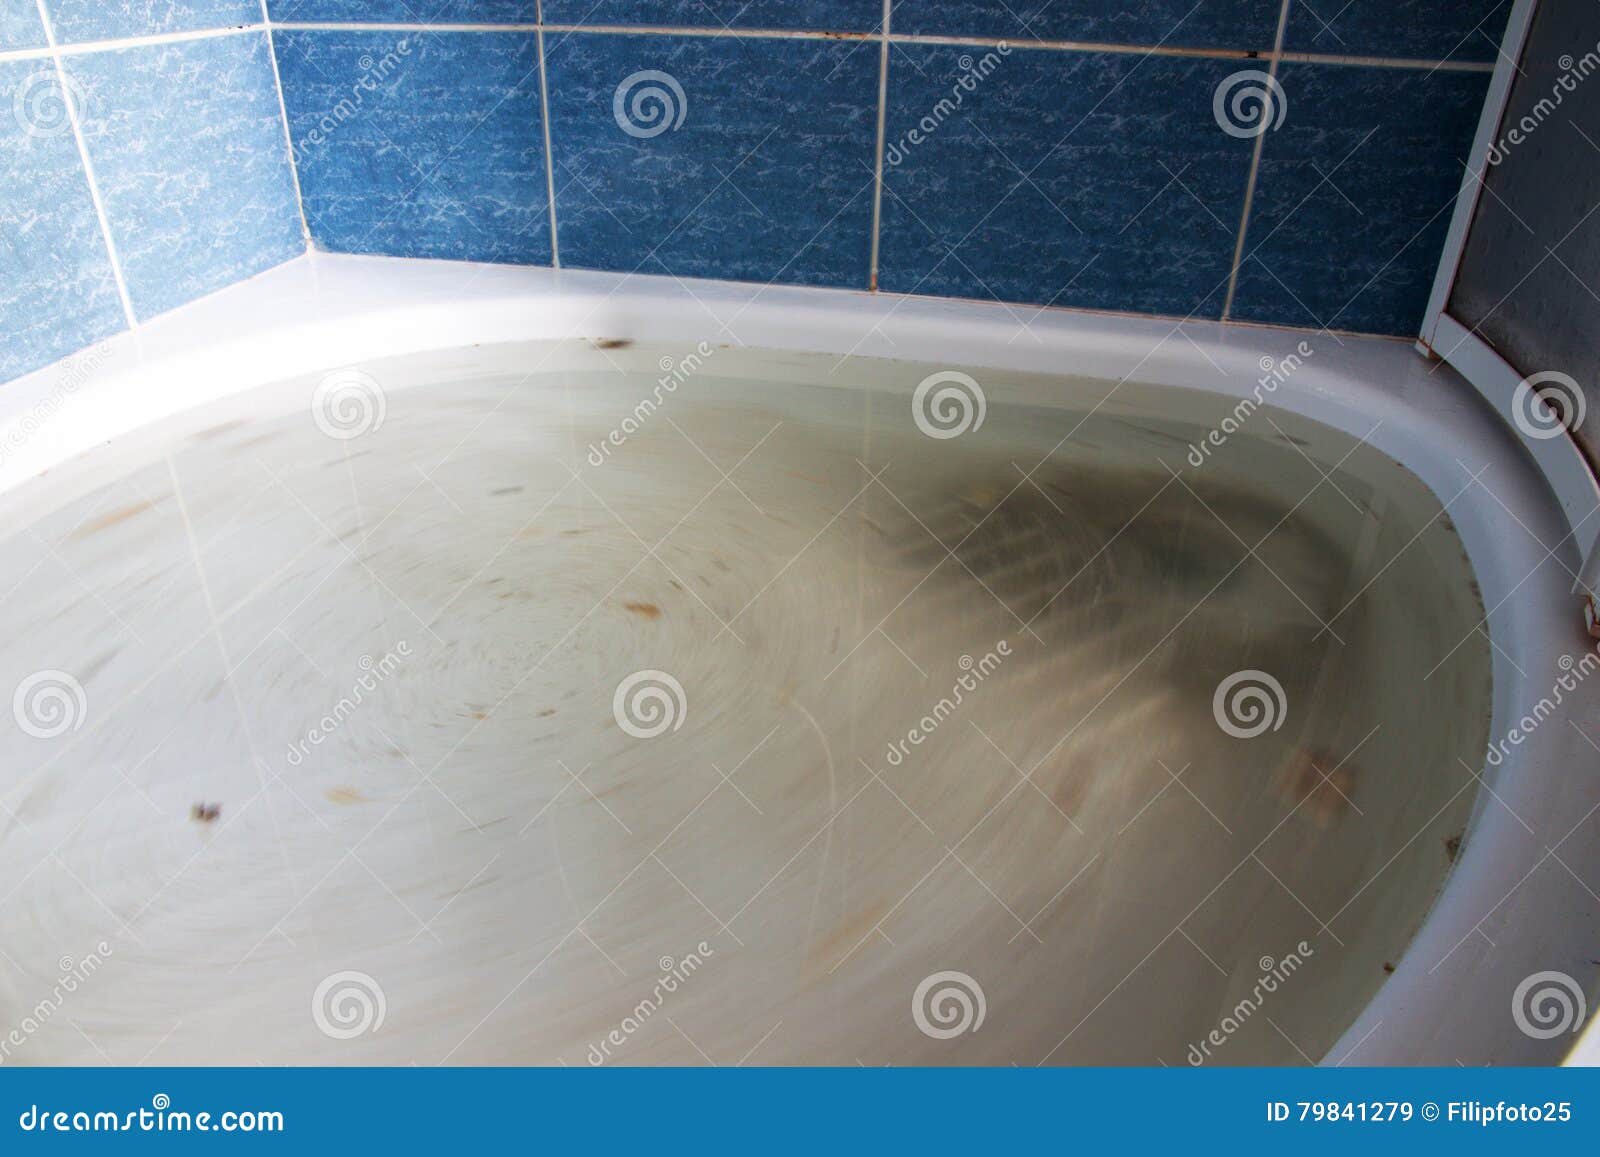 Teenager Girl Plunging The Clogged Bathtub Stock Photo - Download